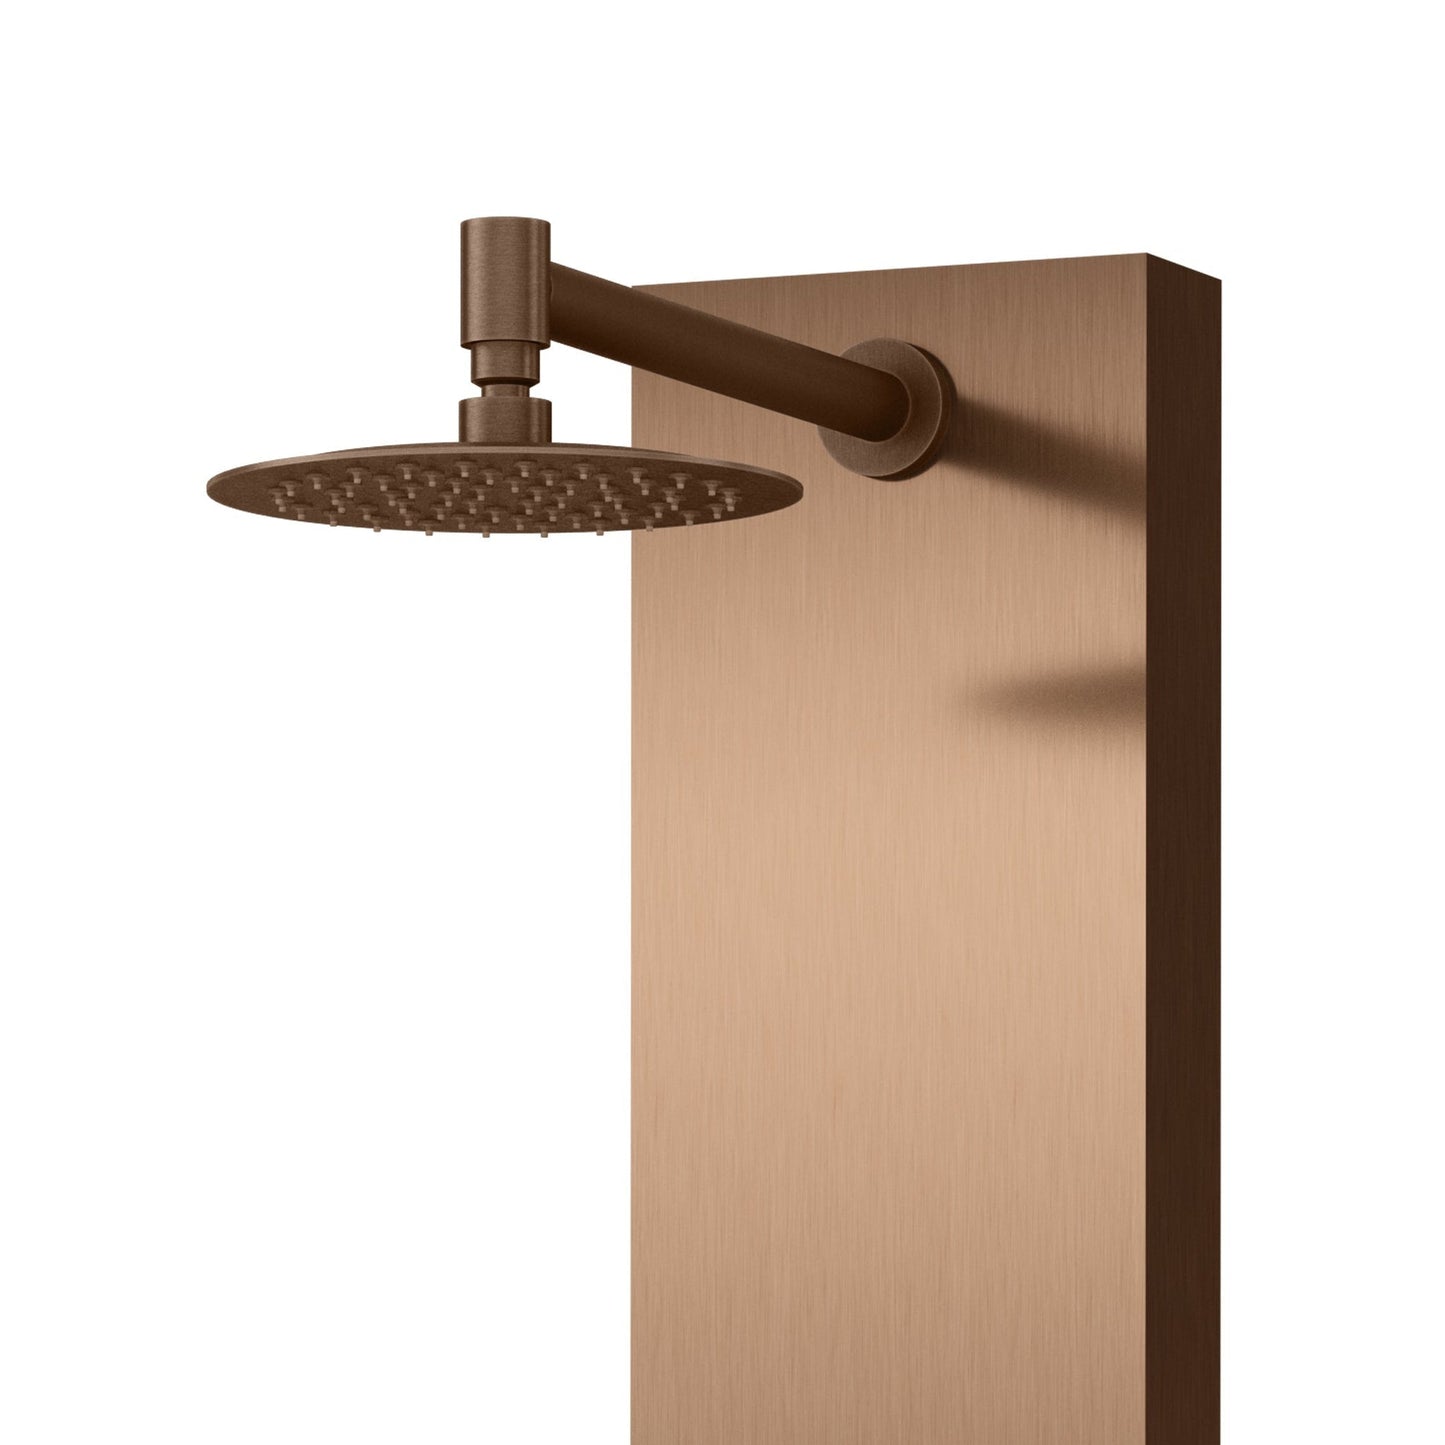 PULSE ShowerSpas Monterey 59" Rain Shower Panel 1.8 GPM in Oil Rubbed Bronze Finish With 6-Silk Spray Body Jet and Hand Shower